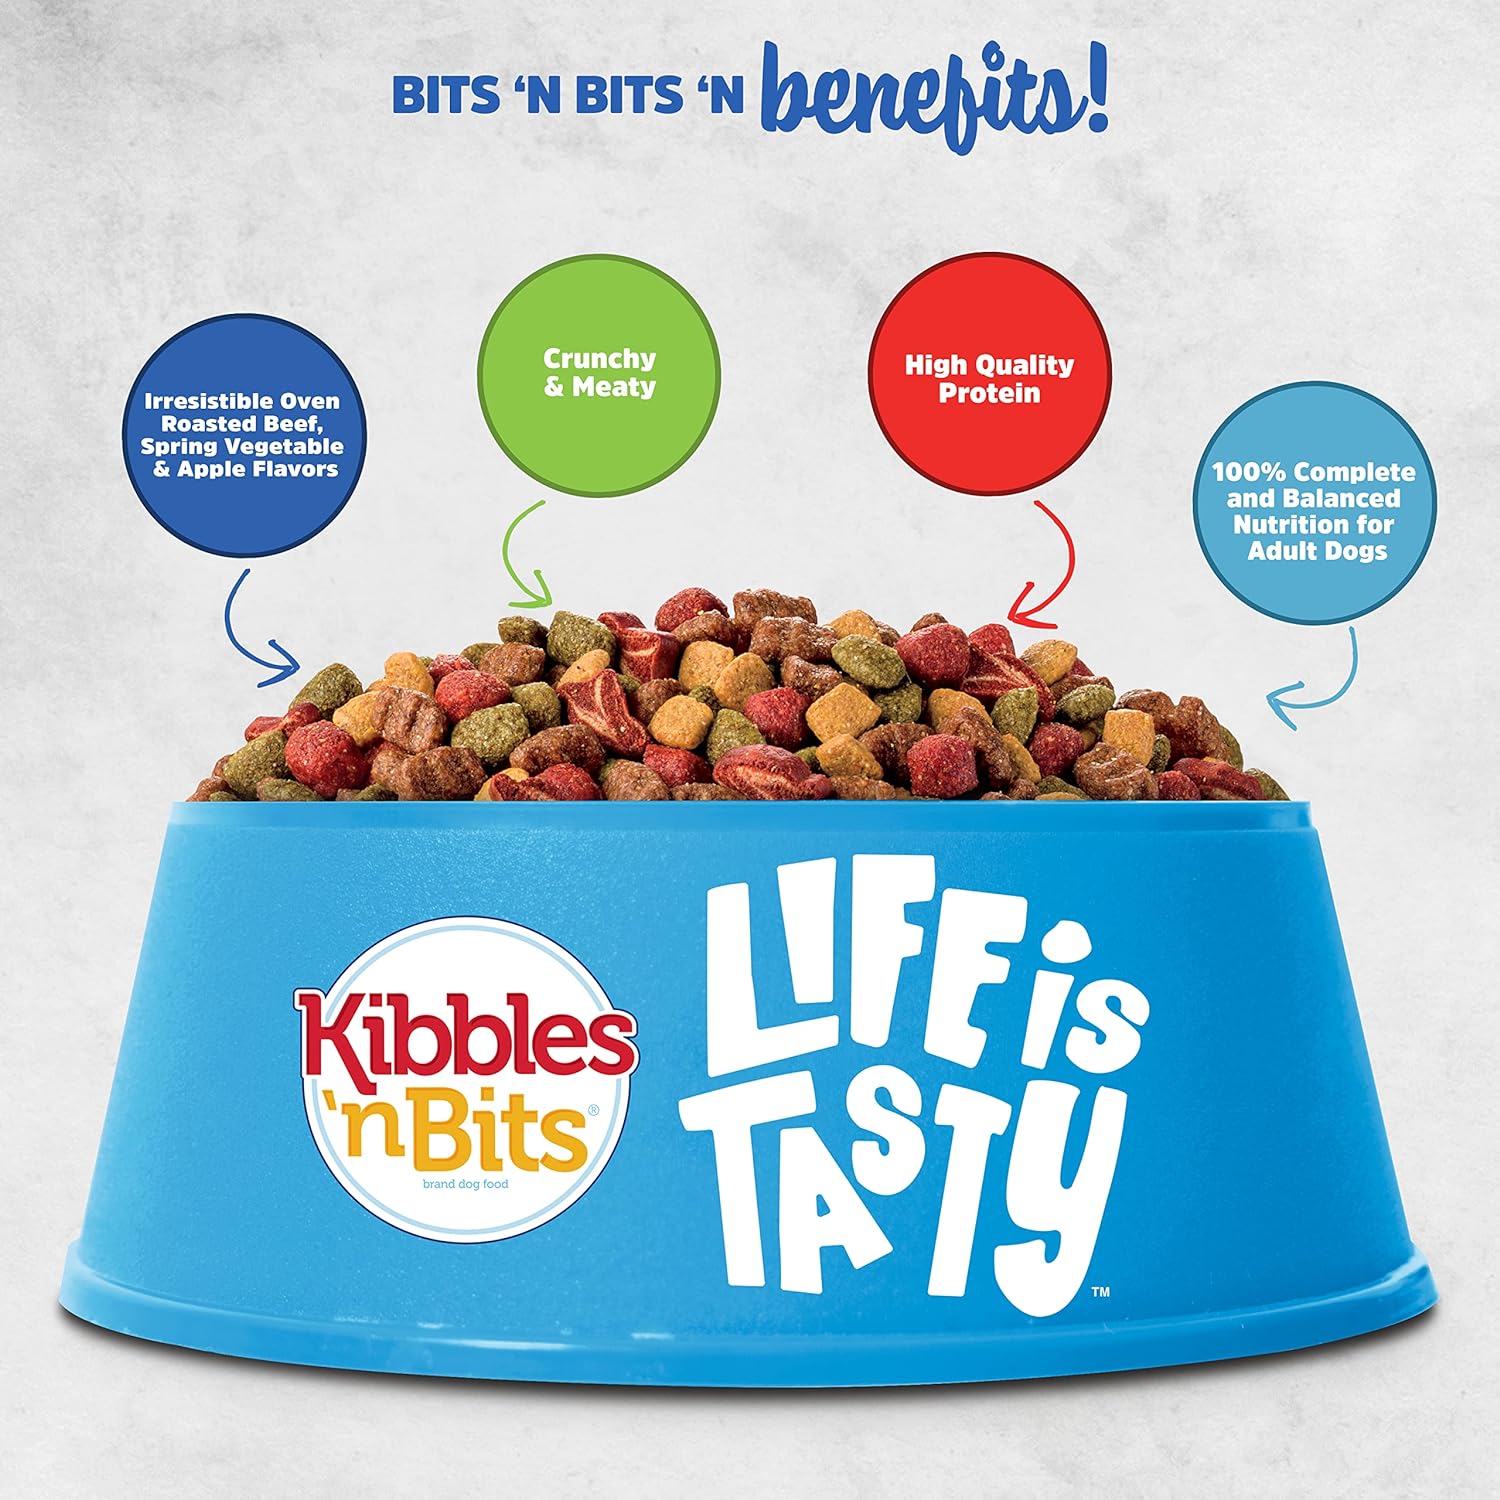 Kibbles 'n Bits Bistro Mini Bits Small Breed Oven Roasted Beef Flavor Dry Dog Food, 16 Pound Bag : Pet Supplies